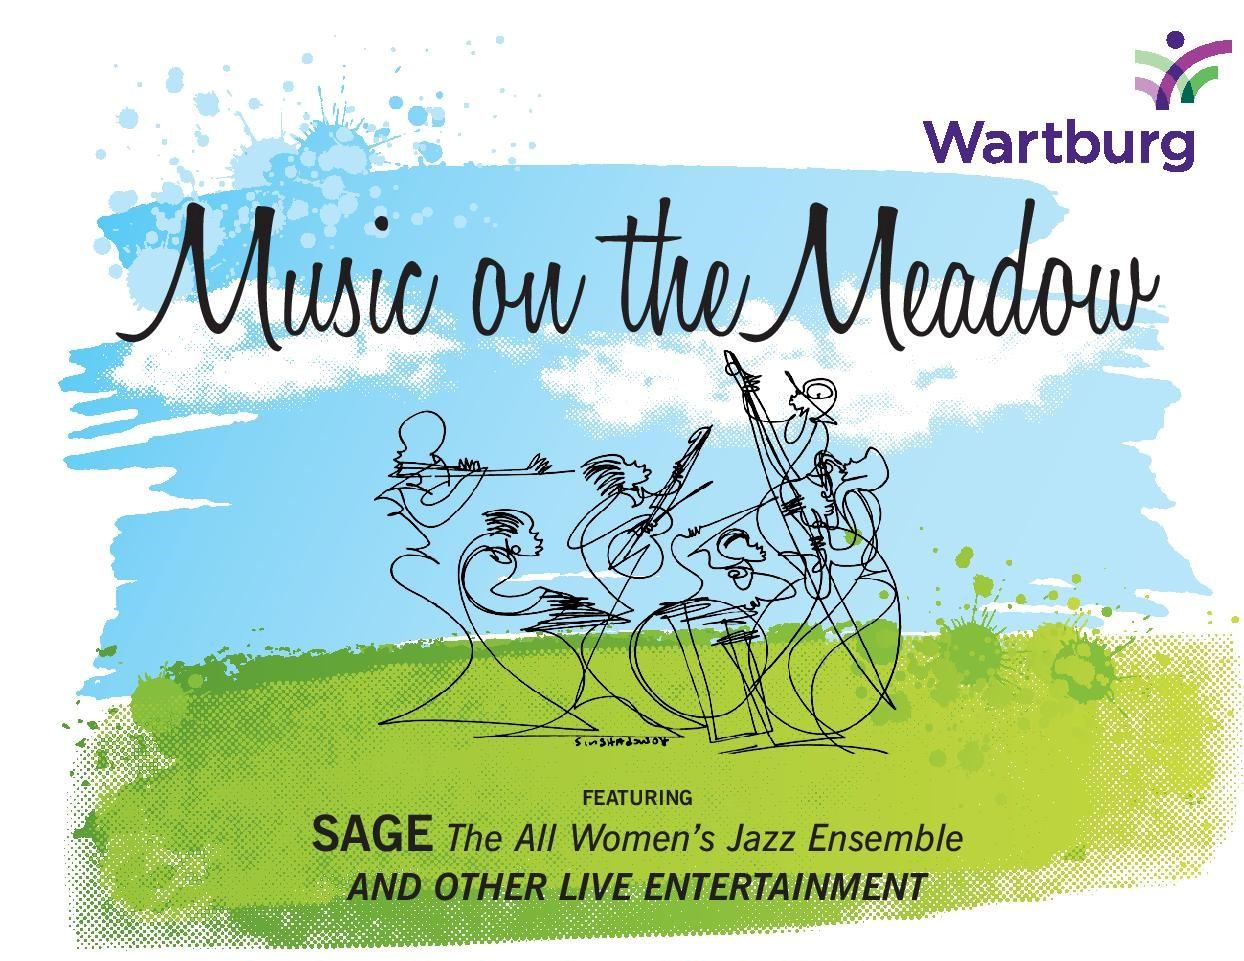 Music on the Meadow at Wartburg